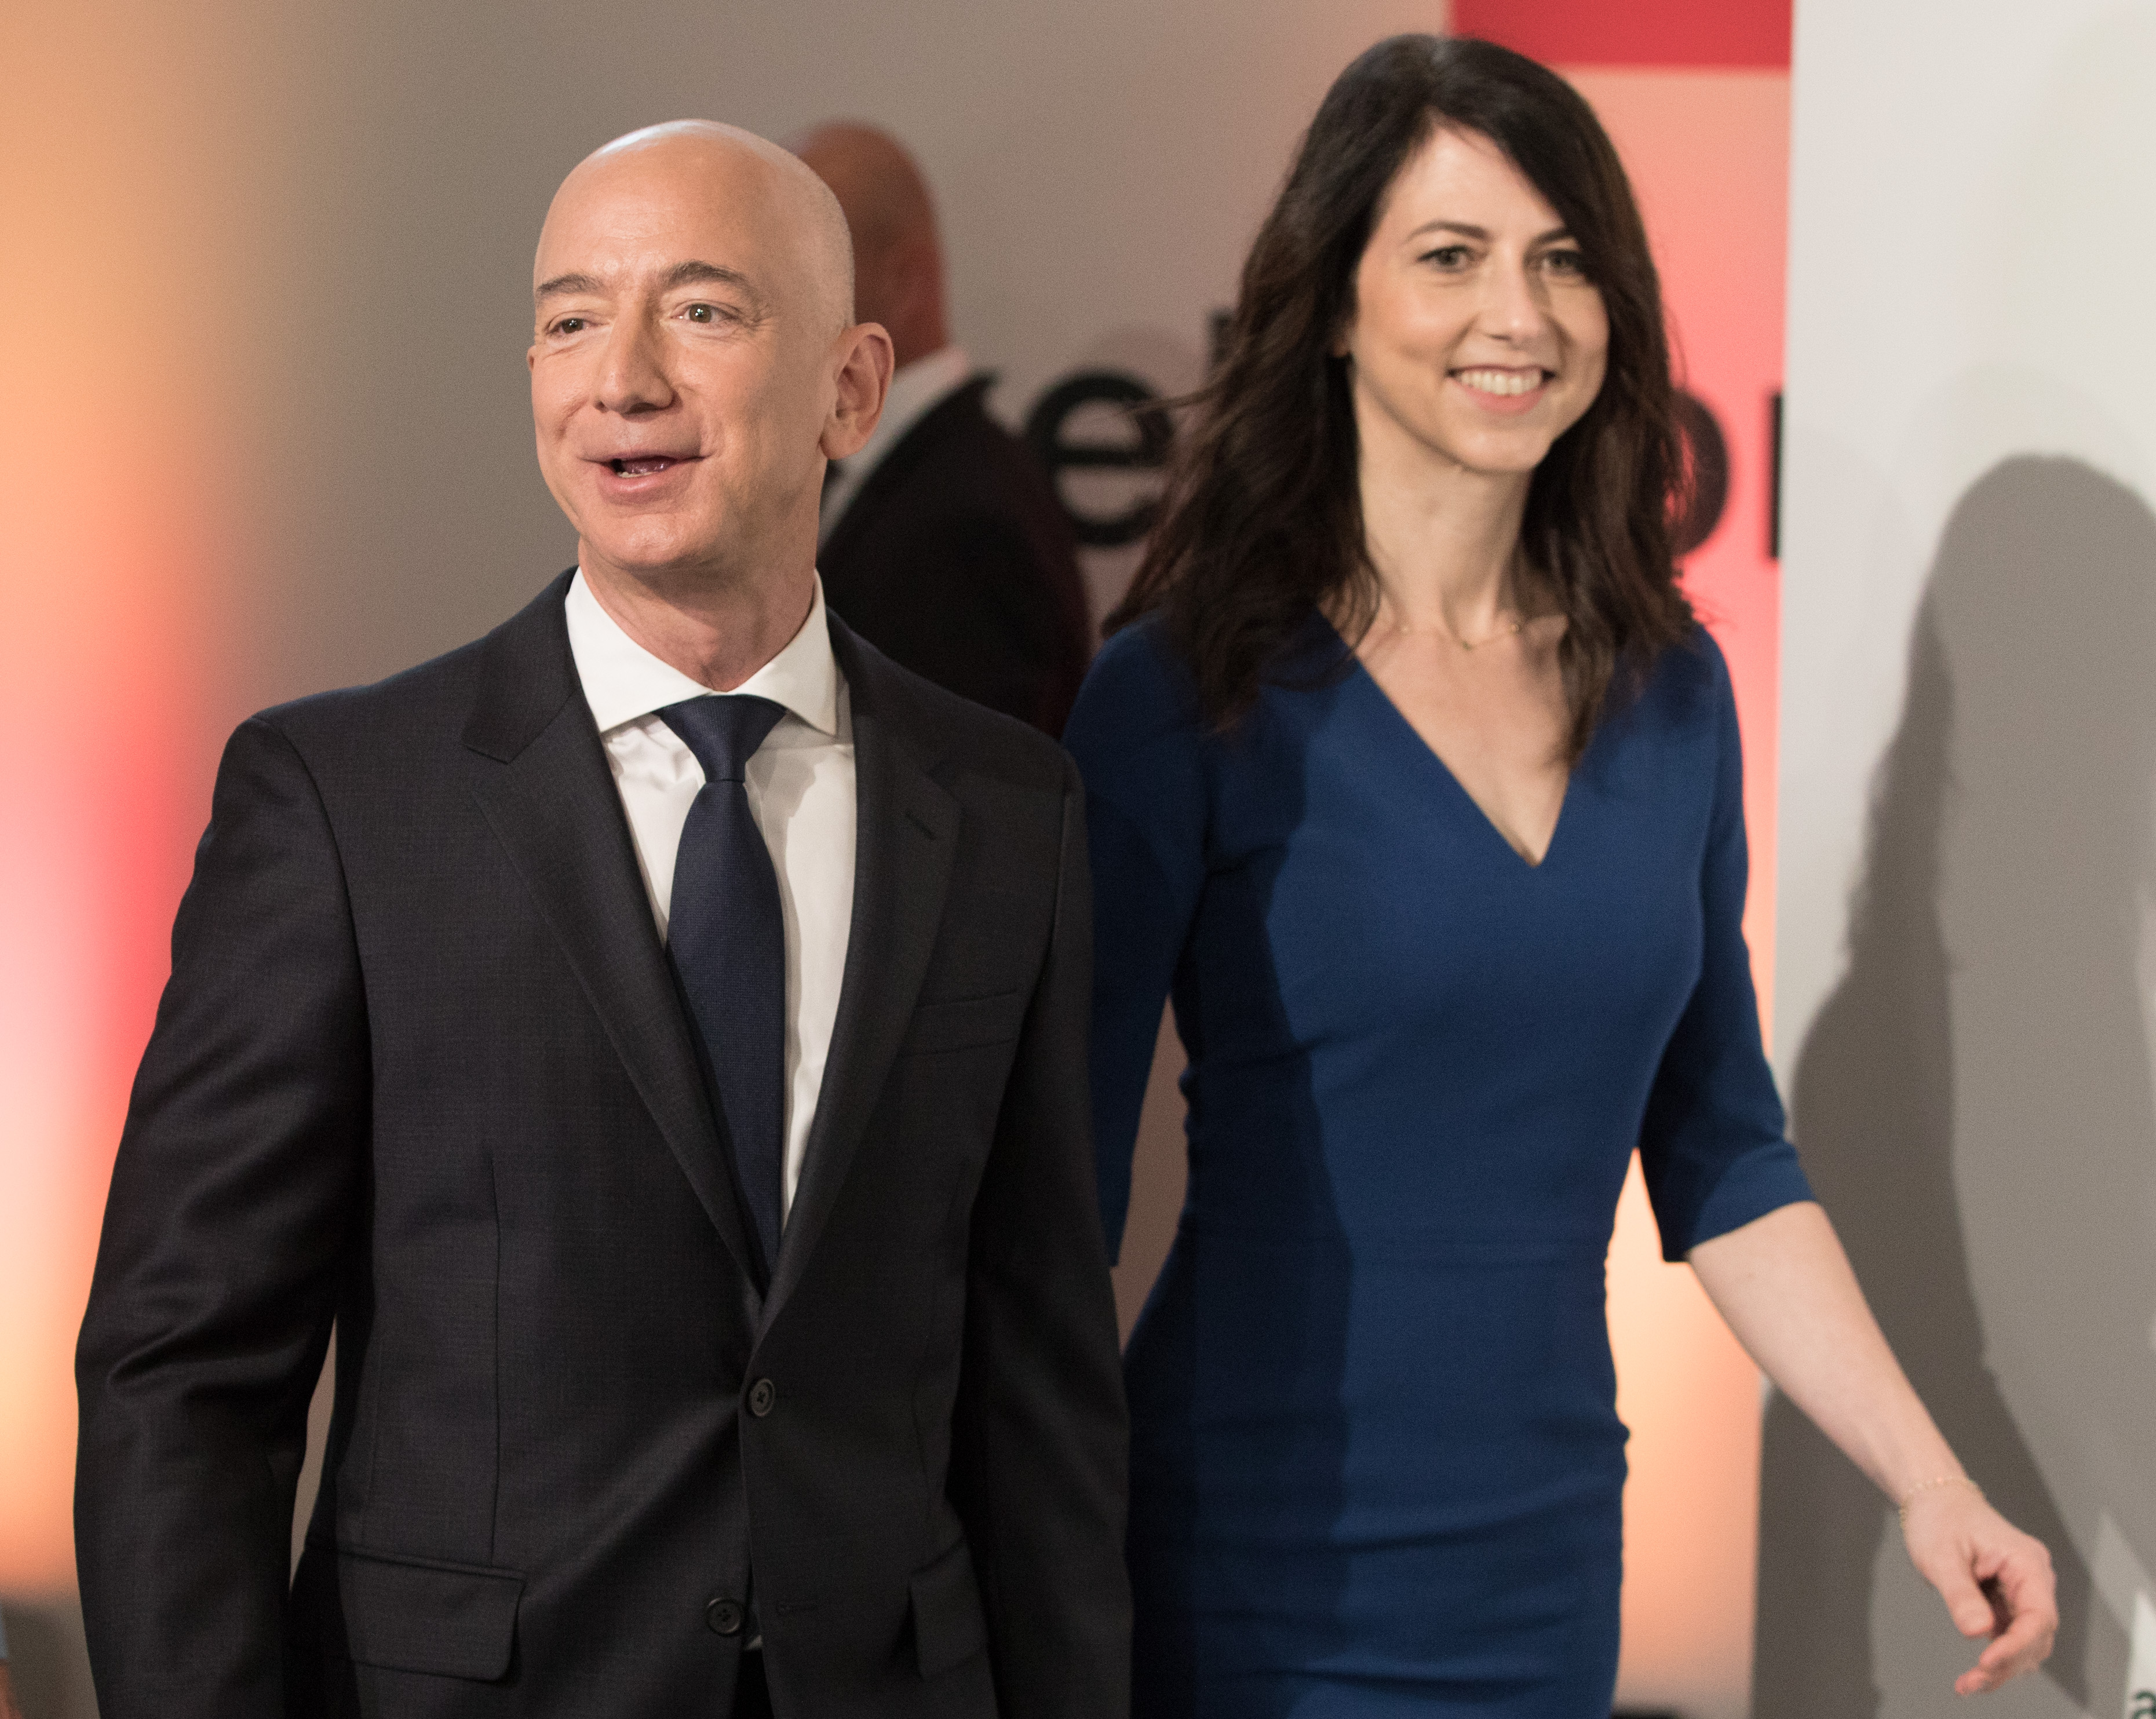 Despite Over $100 Billion at Stake, the Bezos Divorce May Actually Be Fast and Easy